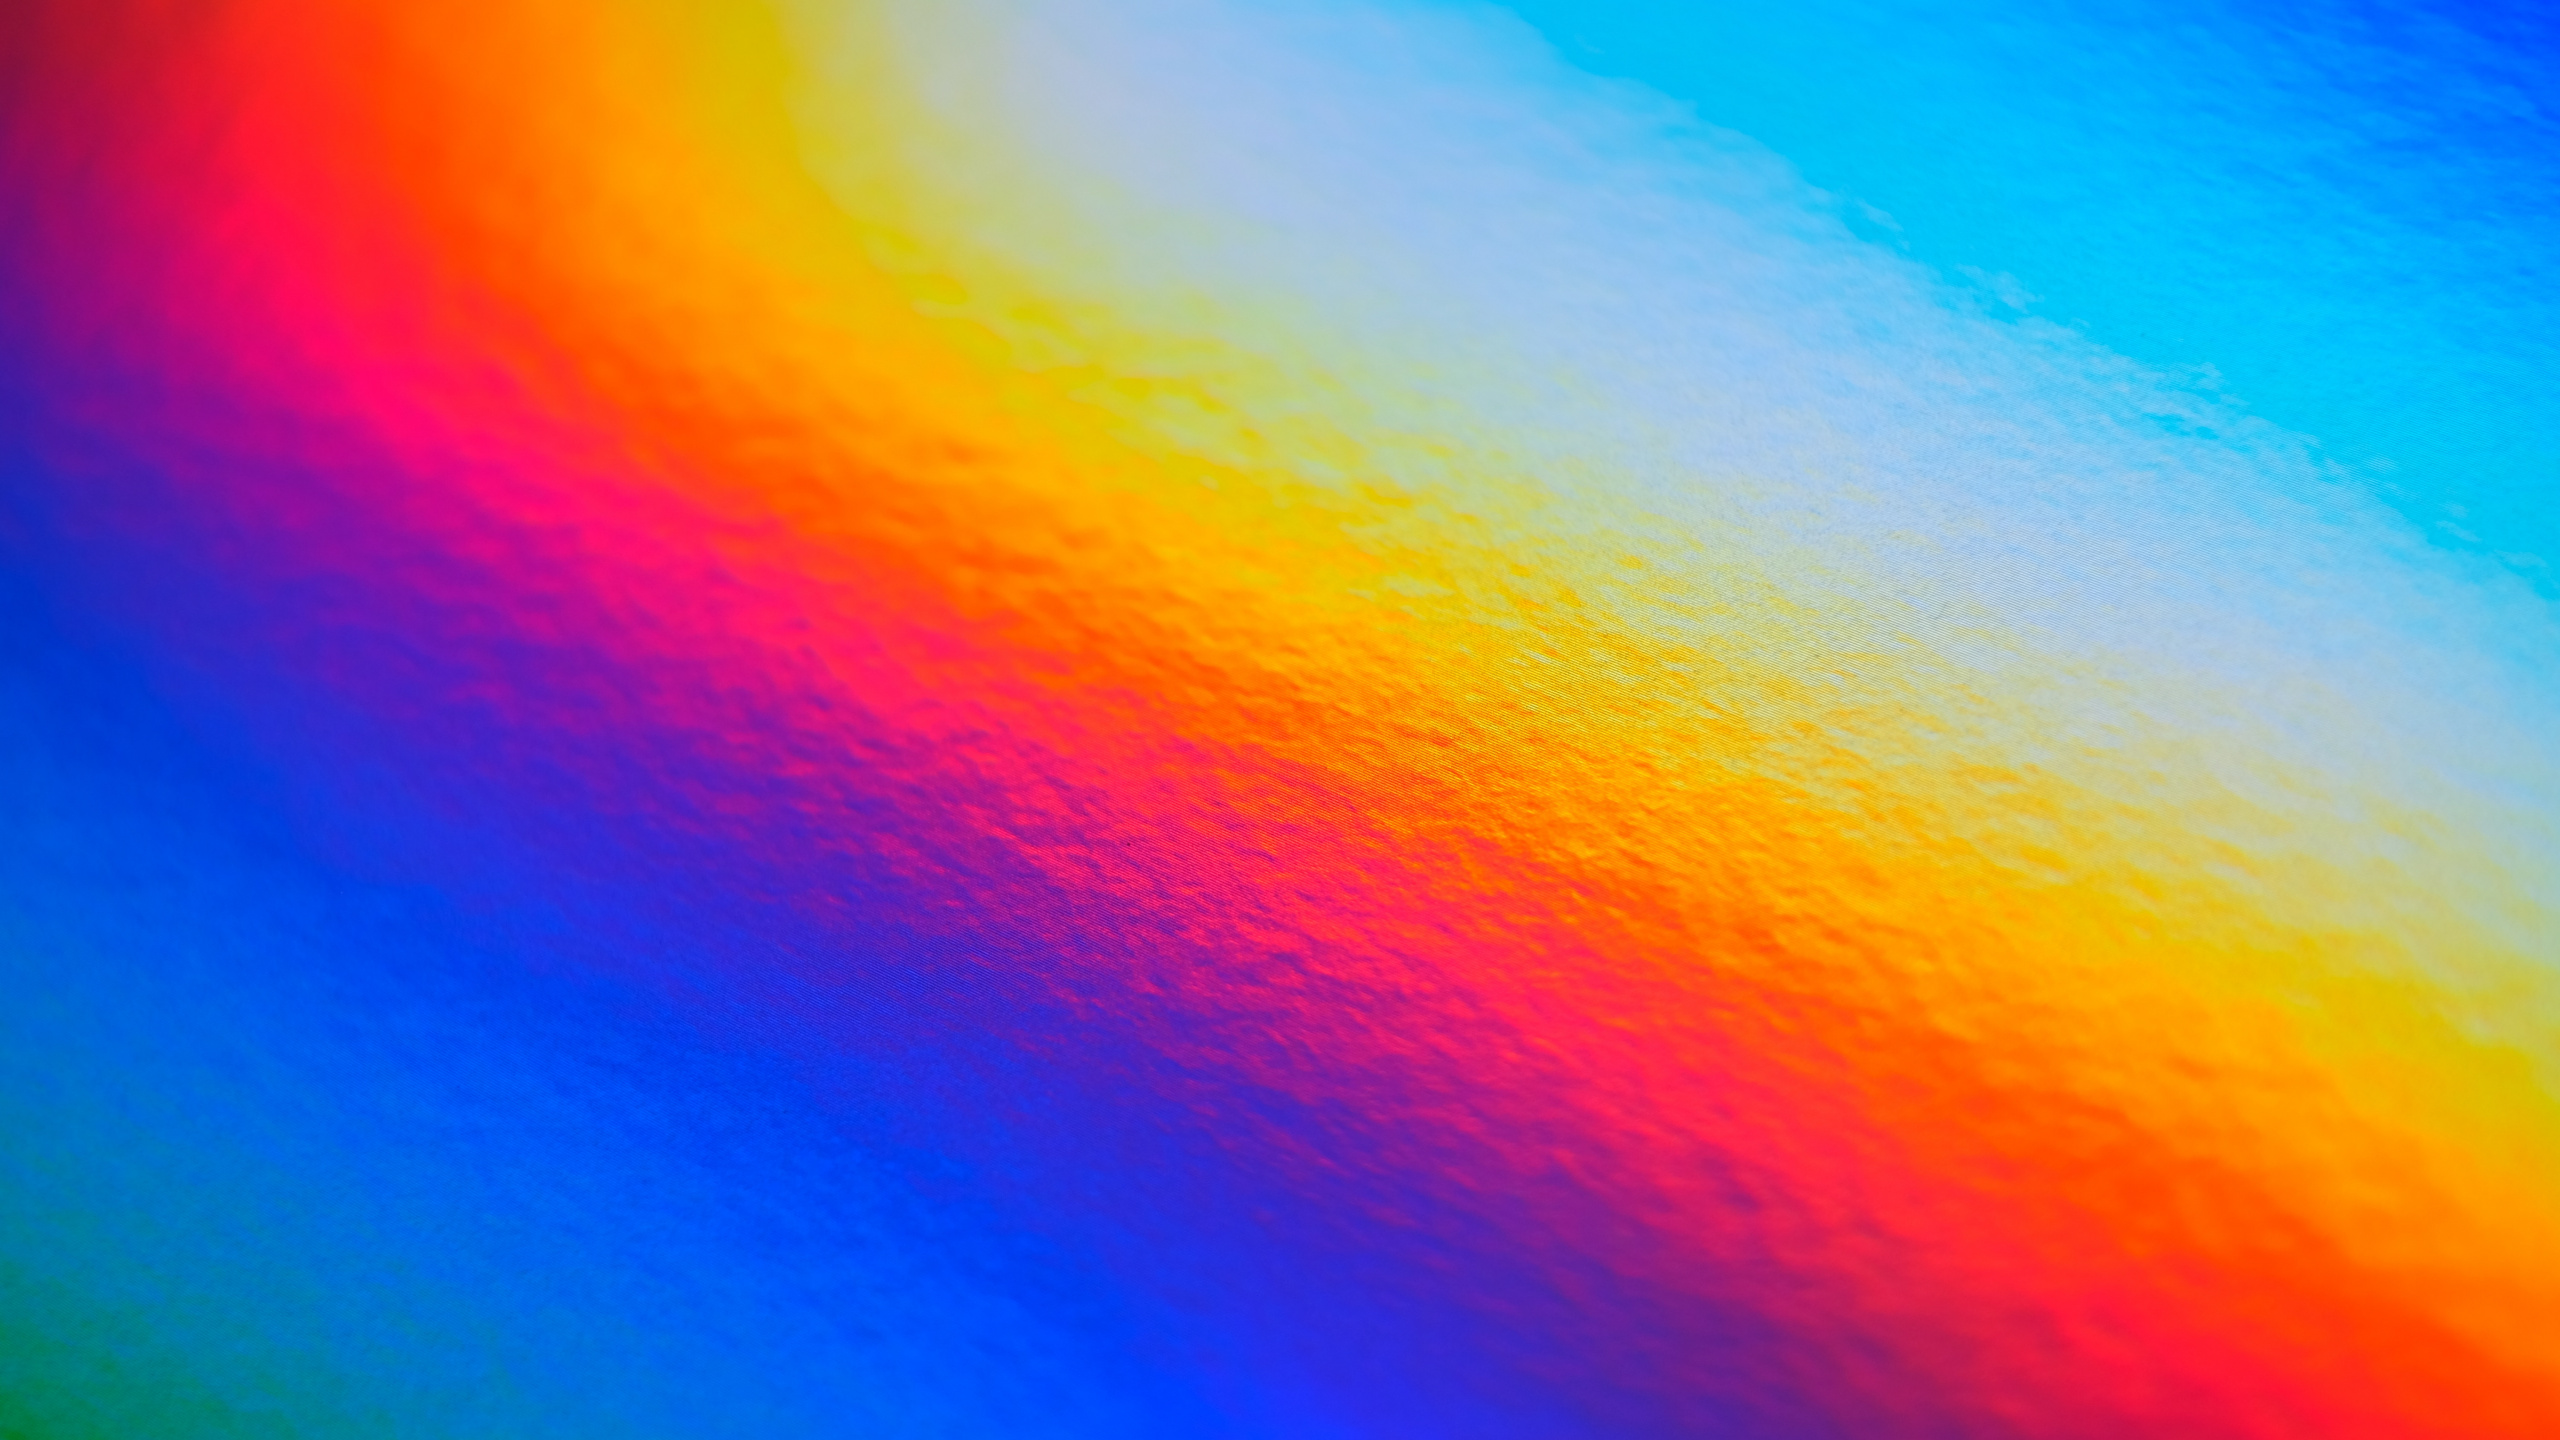 Orange and Blue Abstract Painting. Wallpaper in 2560x1440 Resolution